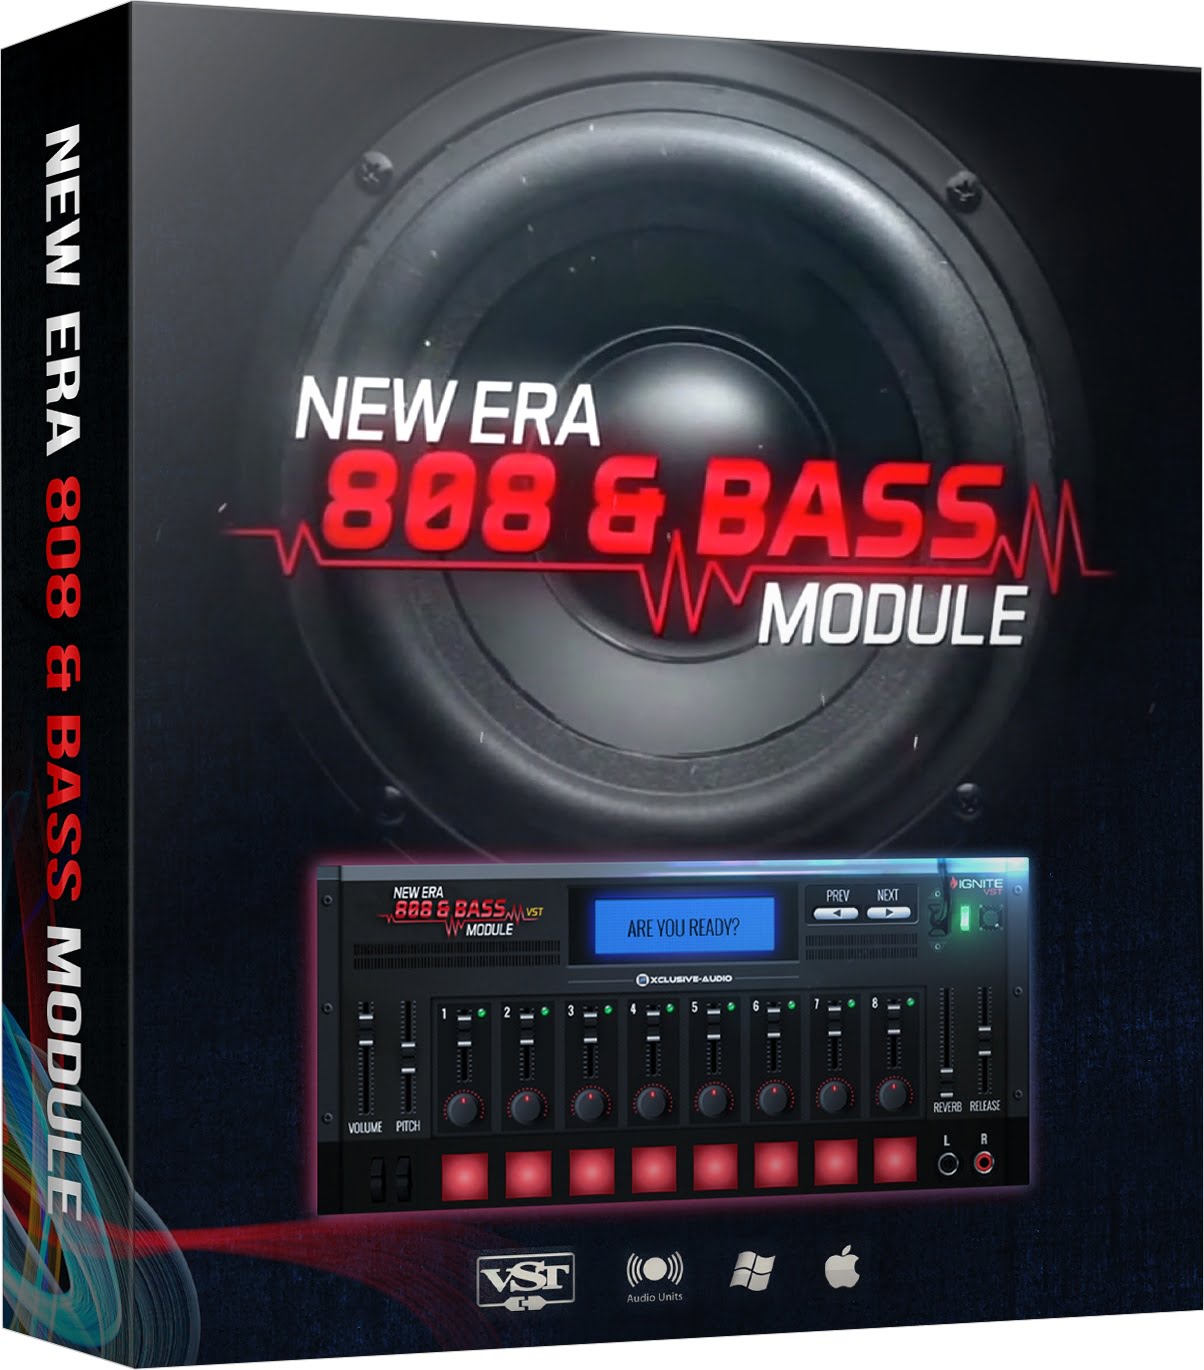 Download 808 bass for fl studio 12 free download